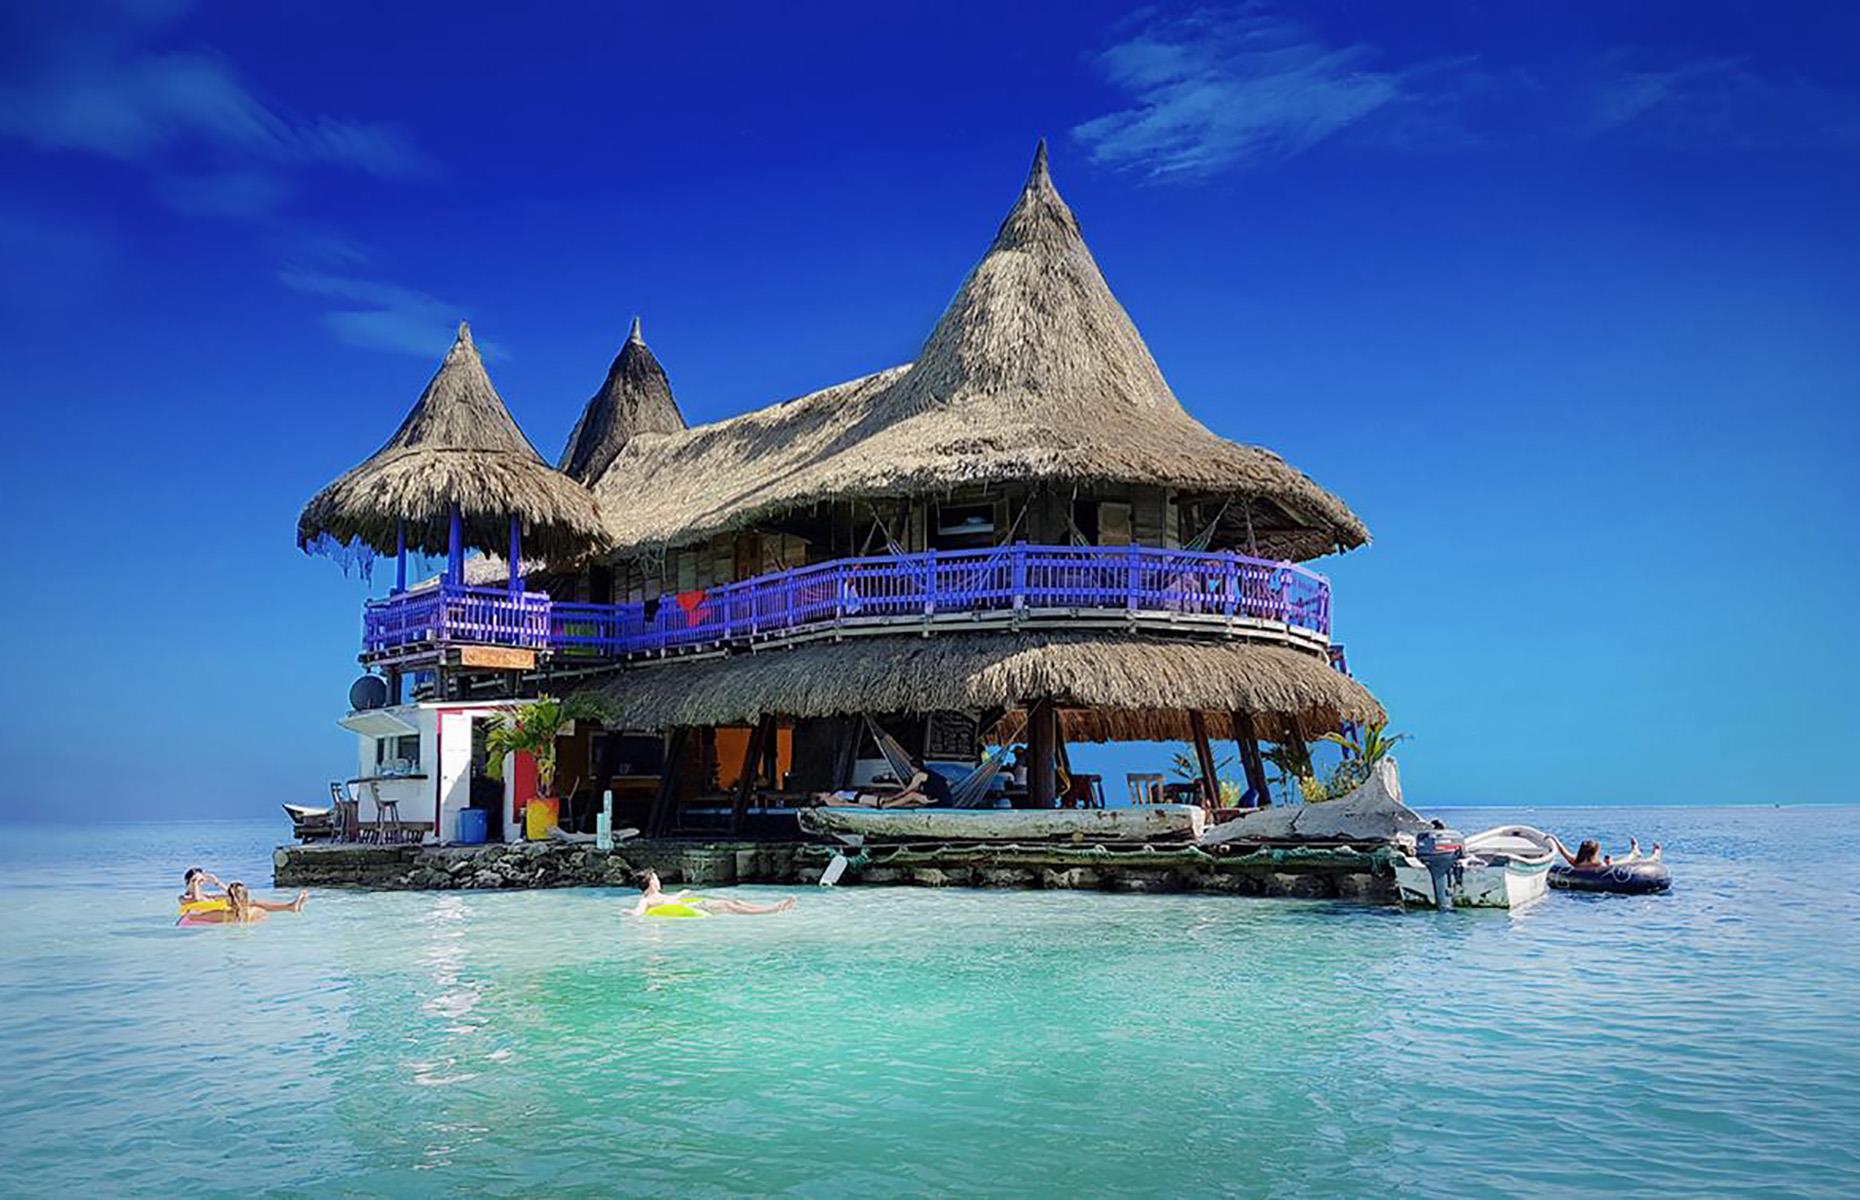 <p>Floating hotels aren't just the preserve of the wealthy, and they don't have to be 5-star luxury properties either. In Colombia, <a href="https://casaenelagua.com">Casa en el Agua</a>, or 'House on the Water', is a hostel with a difference. Set in the San Bernardo Corals National Park in Colombia, this modest little hostel enjoys a prime location atop the turquoise Caribbean Sea.</p>